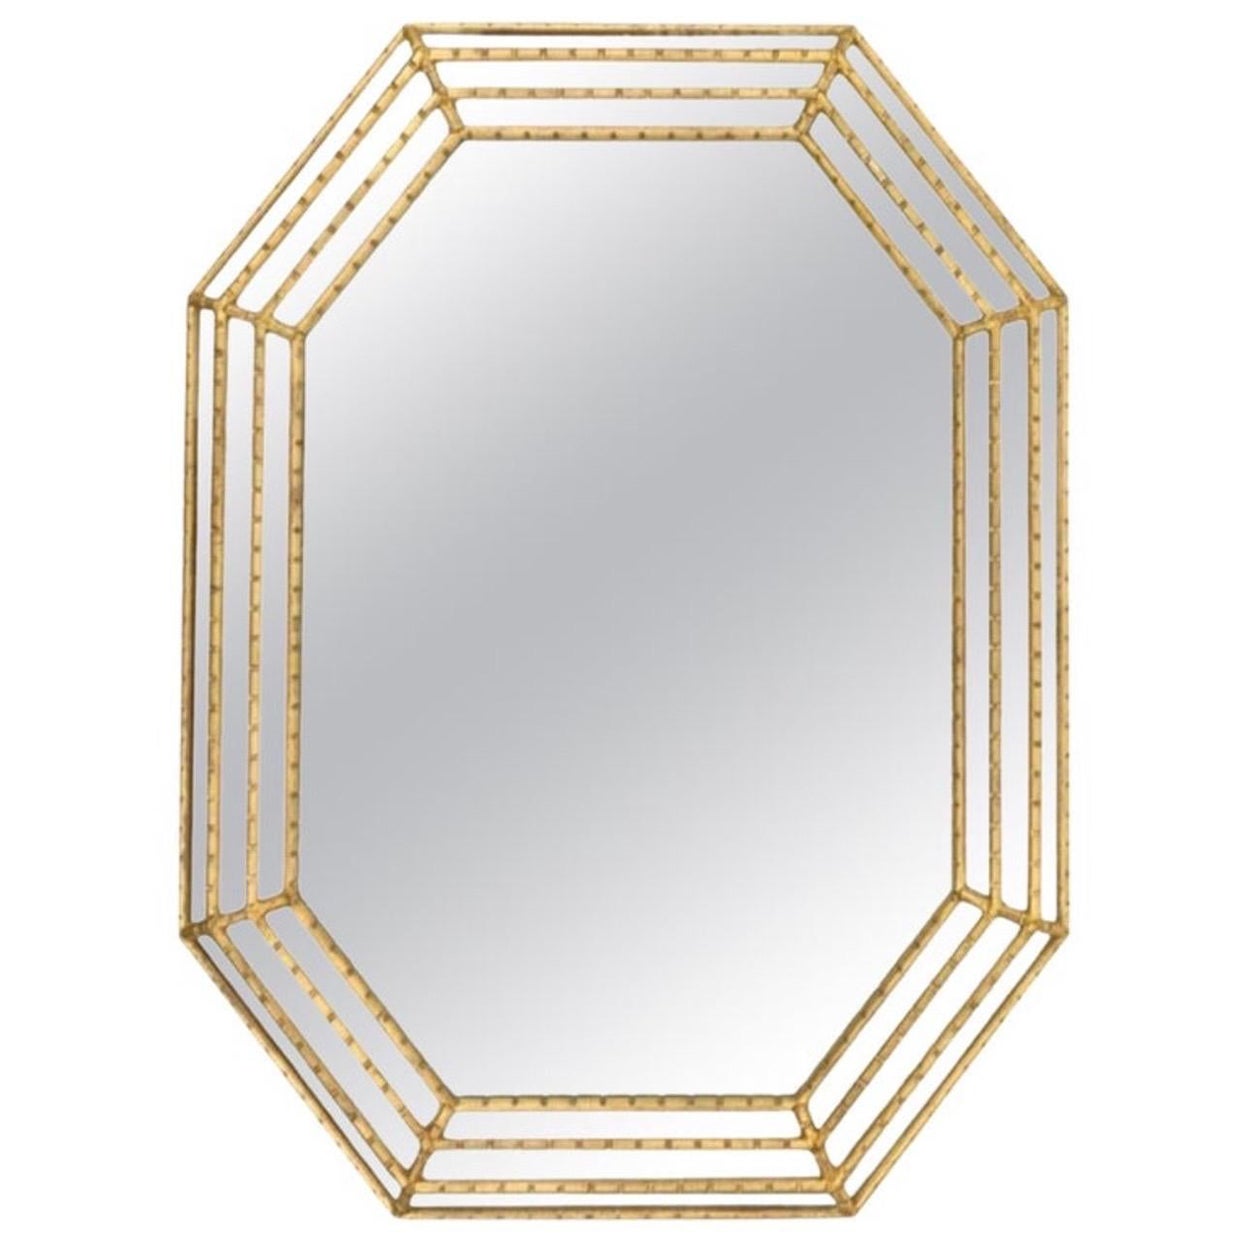 Labarge Gold Faux Bamboo Octagonal Mirror